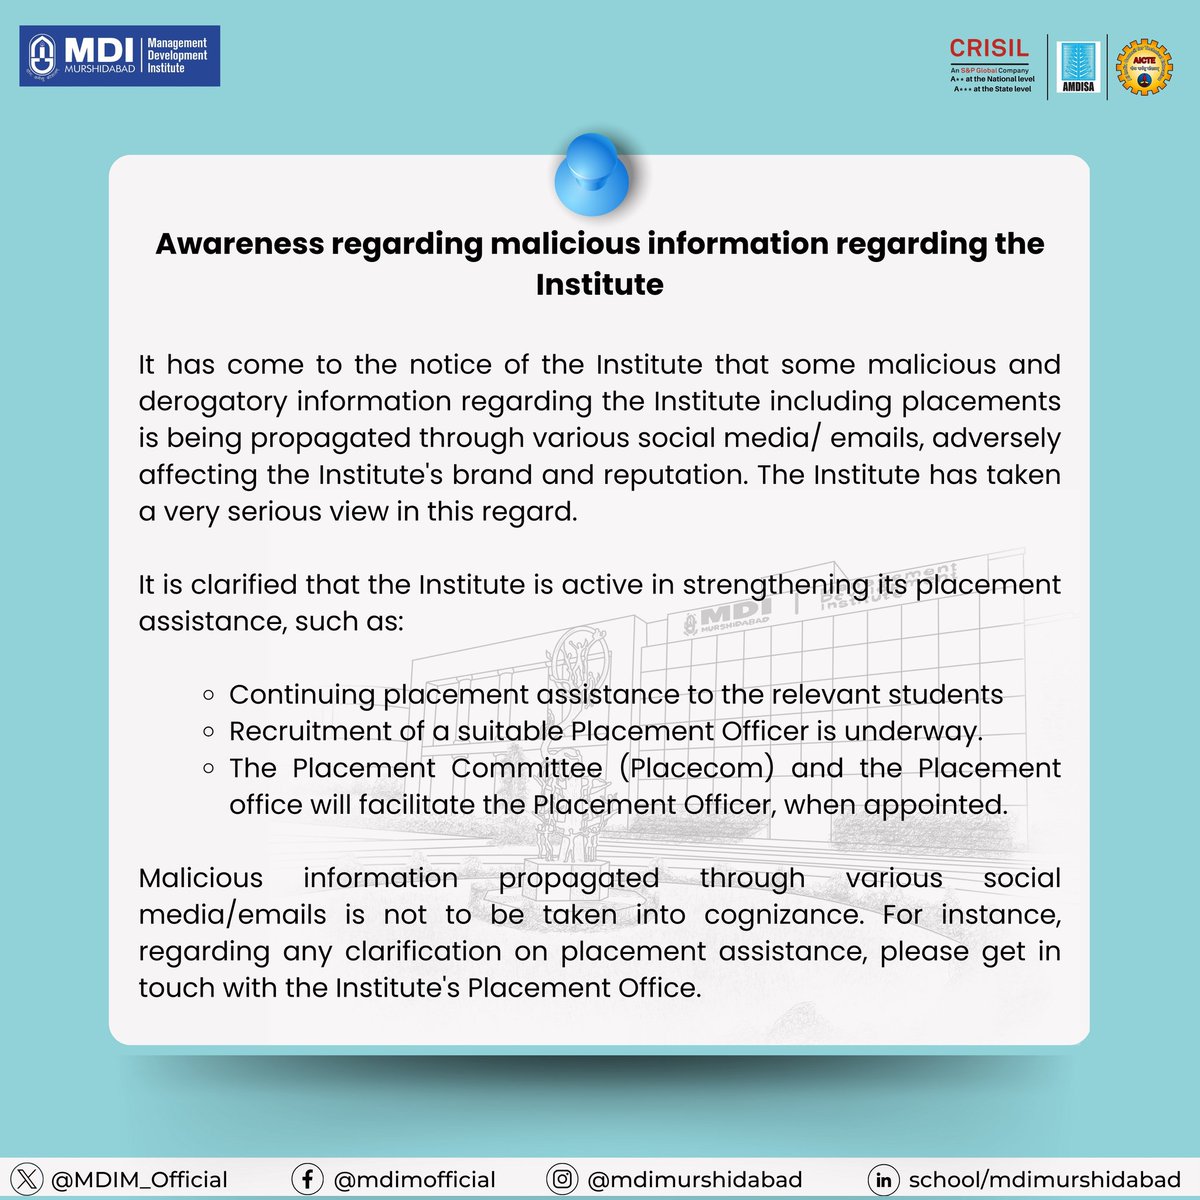 #MDIM is dedicated to creating a safe, inclusive environment for everyone associated and thus, urges everyone to verify information before sharing it & to refrain from spreading false rumors as misinformation can harm our community & hinder our progress towards positive change.